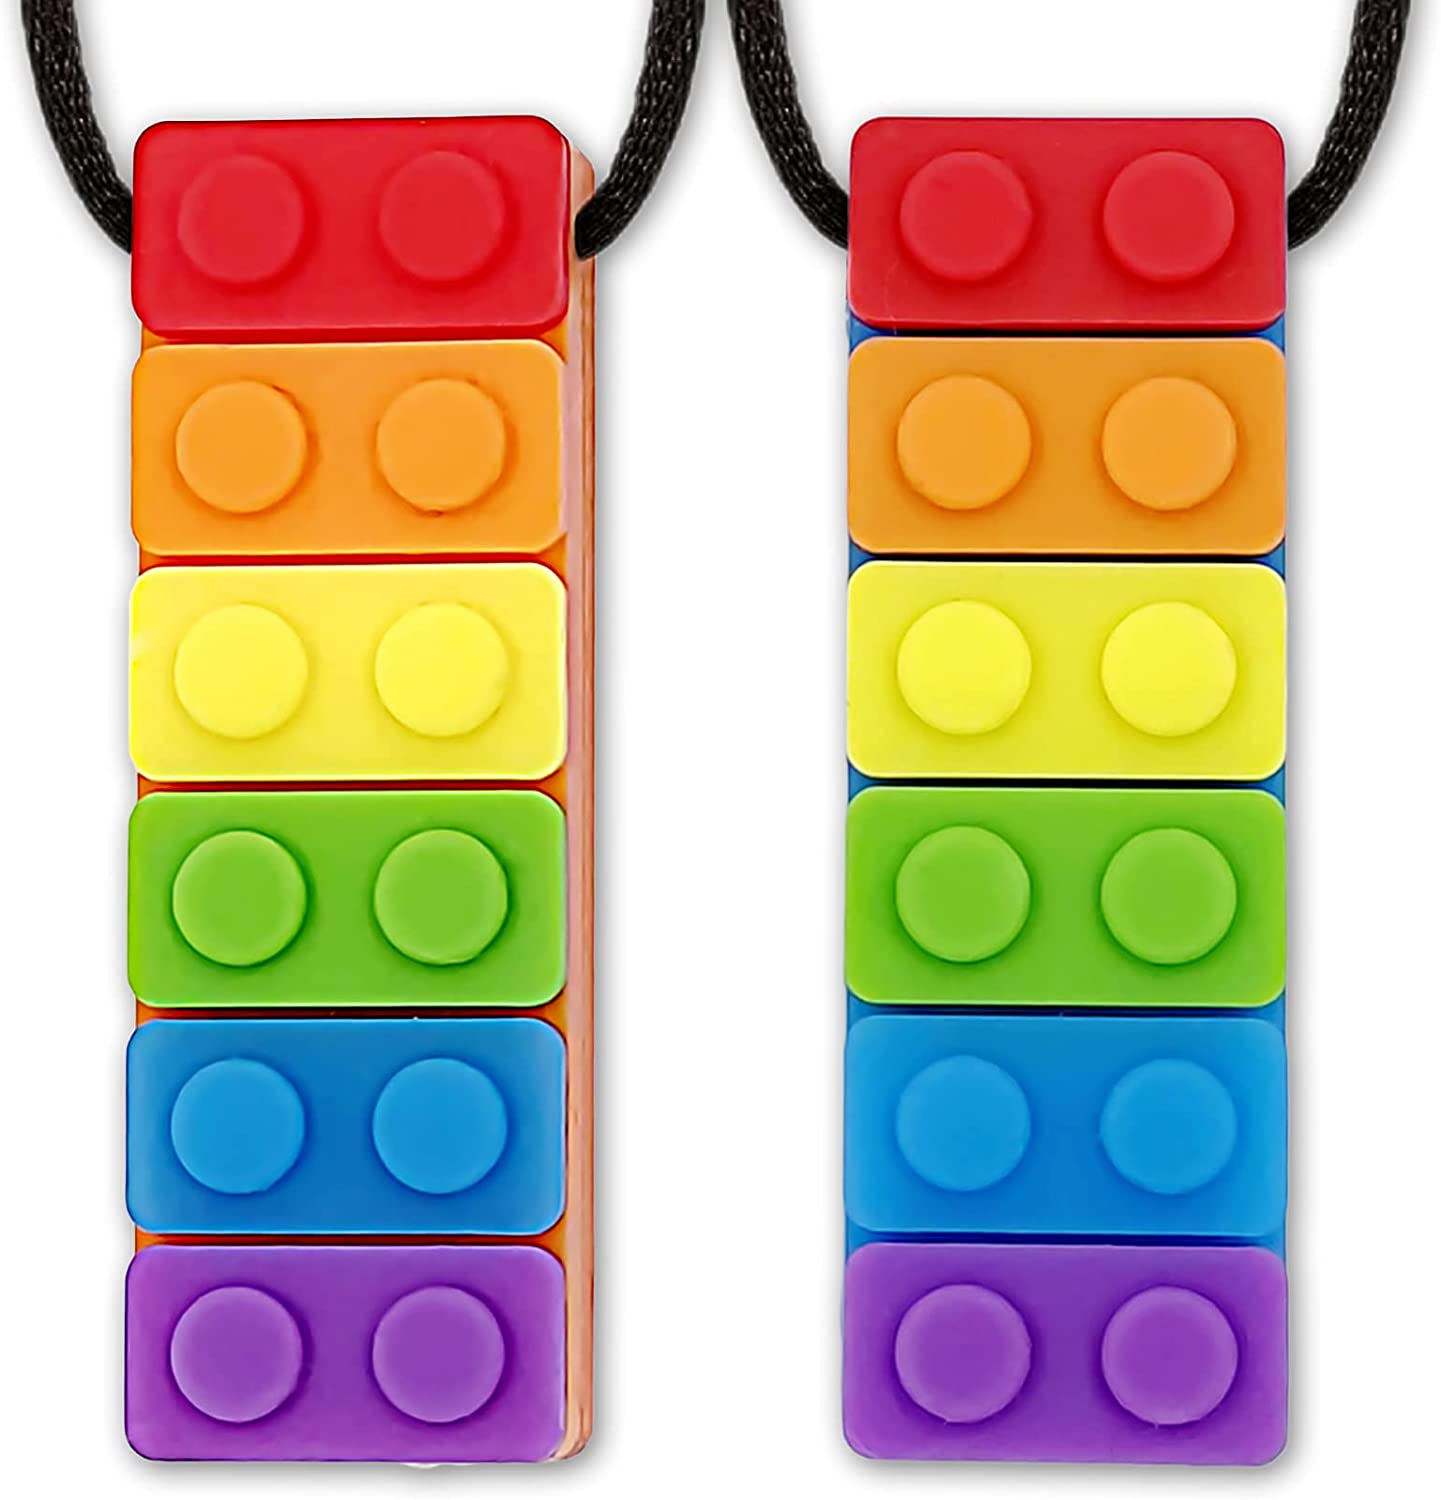 2 Pack Sensory Chew Necklace for Kids Toddlers, Silicone Rainbow Pendant Sticks Autism Chewing Toys Set for Kids with ADHD, Teething, Anxiety, Biting Needs, Oral Sensory Motor Aids